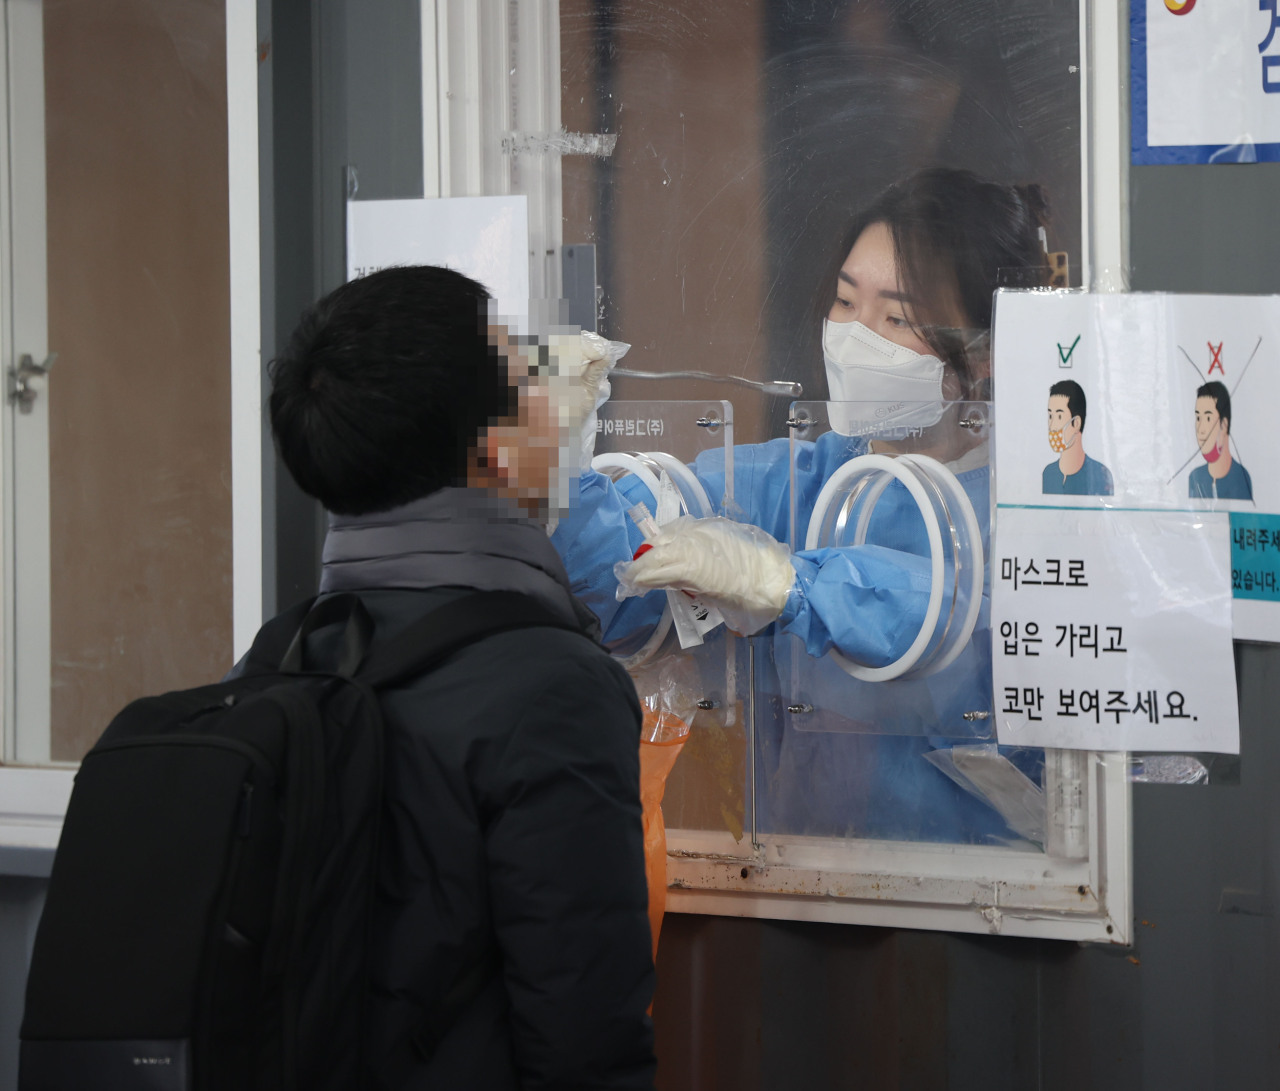 A medical worker carries out a COVID-19 test on a man at a makeshift testing station at Seoul Station in Seoul on Friday. (Yonhap)